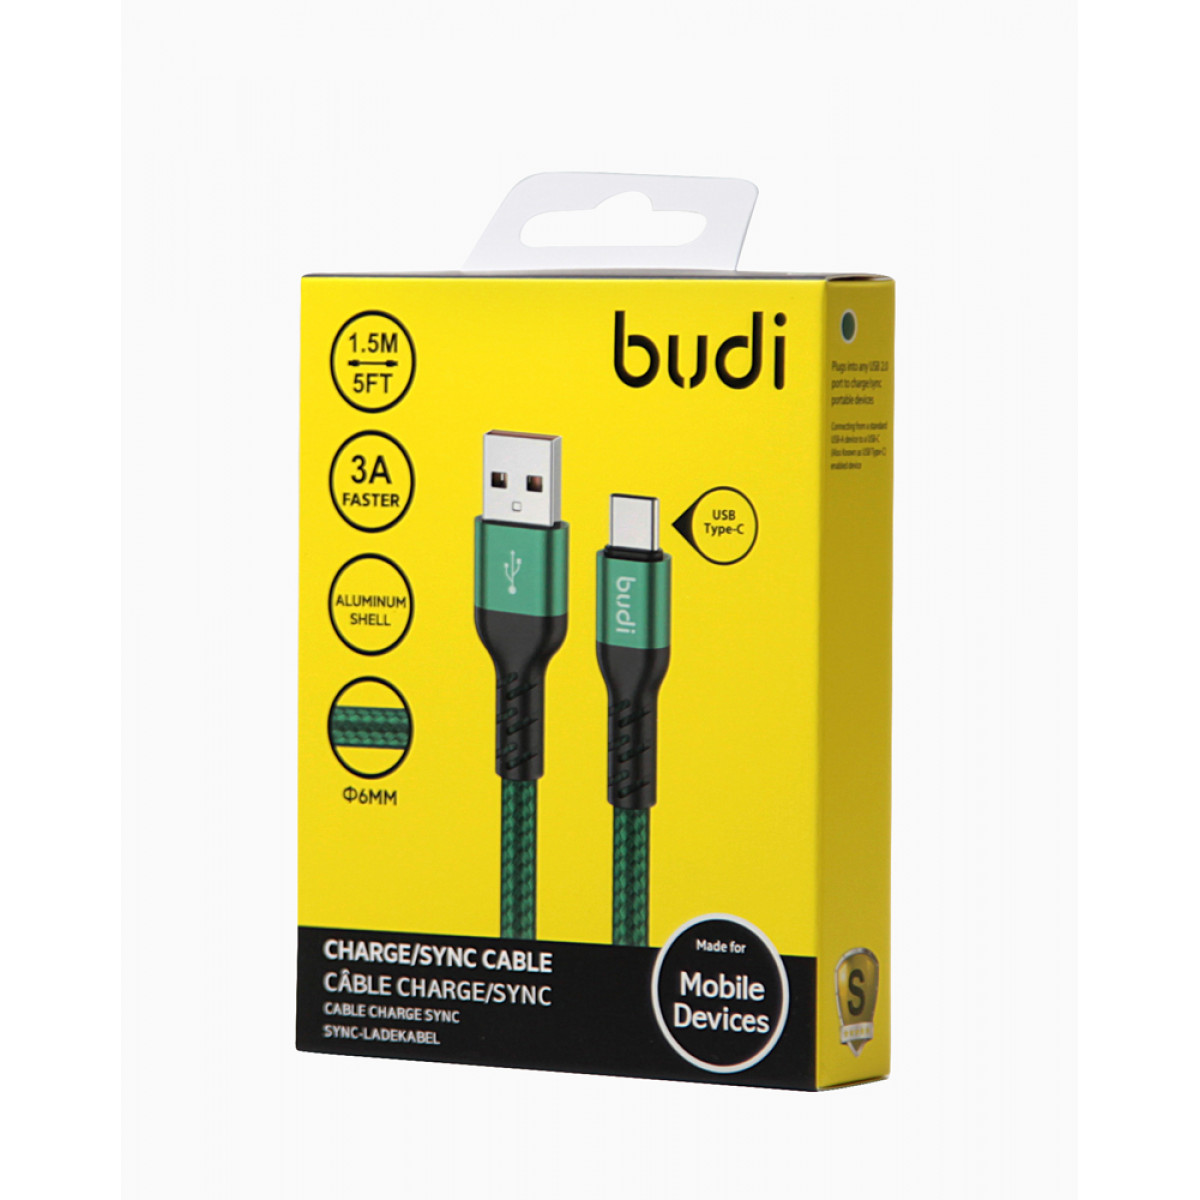 DC232T- Budi USB Cable Type-C to Type-C